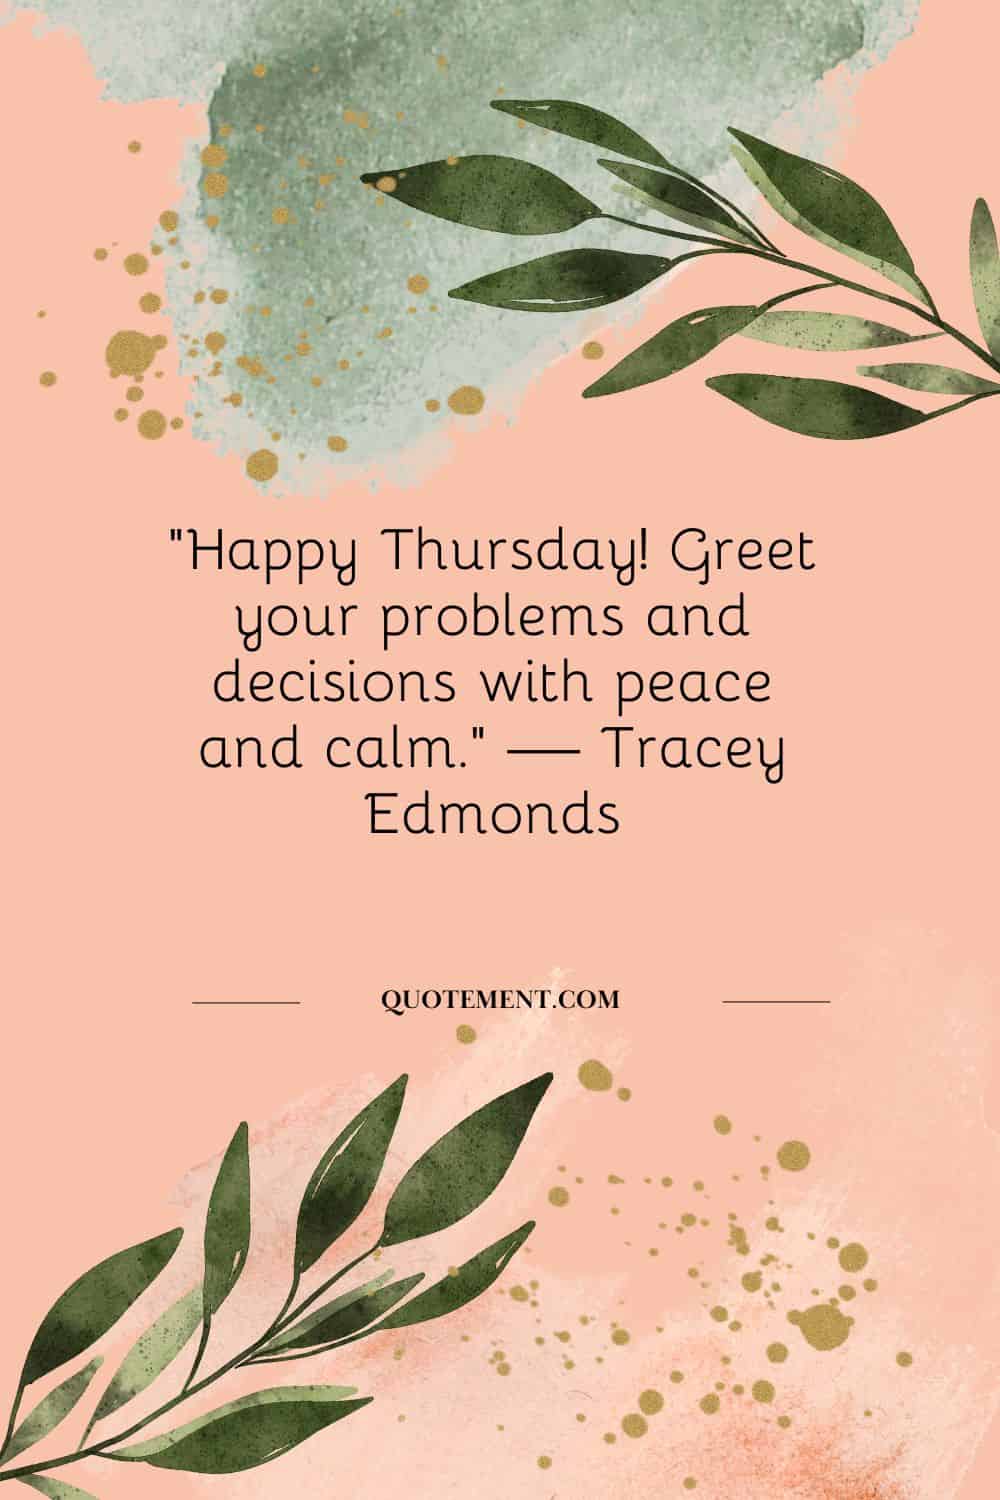 “Happy Thursday! Greet your problems and decisions with peace and calm.” — Tracey Edmonds